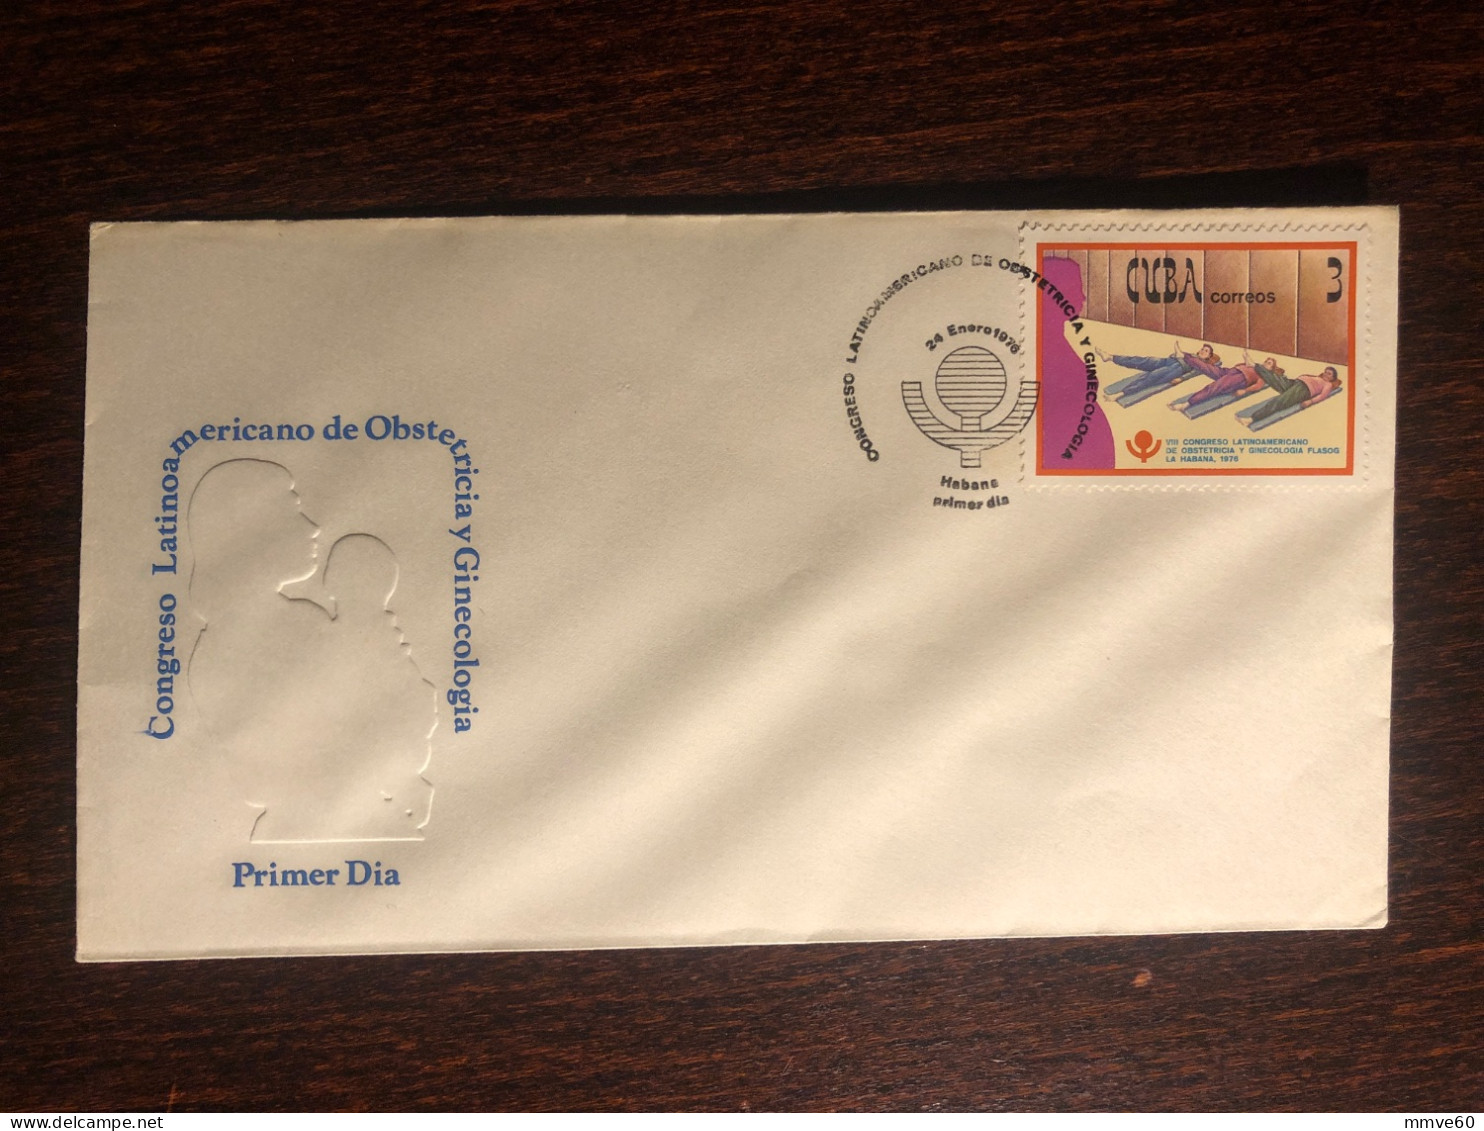 CUBA FDC COVER 1976 YEAR GYNECOLOGY AND OBSTETRICS HEALTH MEDICINE STAMP - Covers & Documents